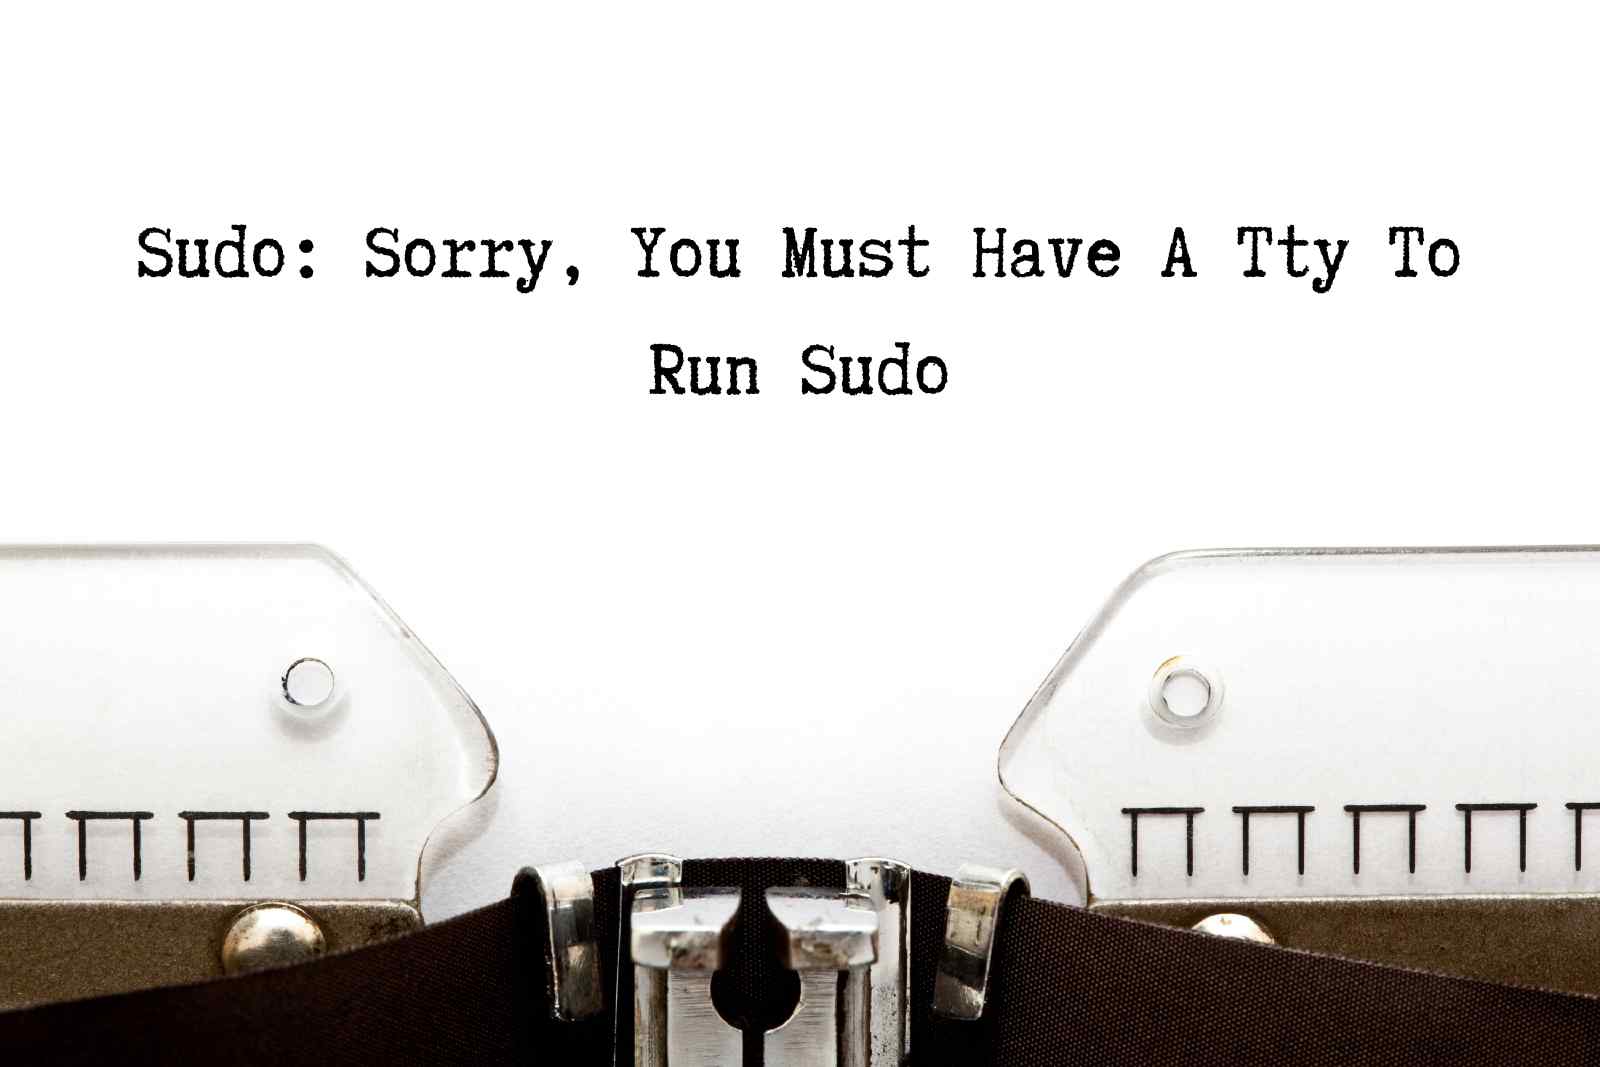 run shell script as sudo without password